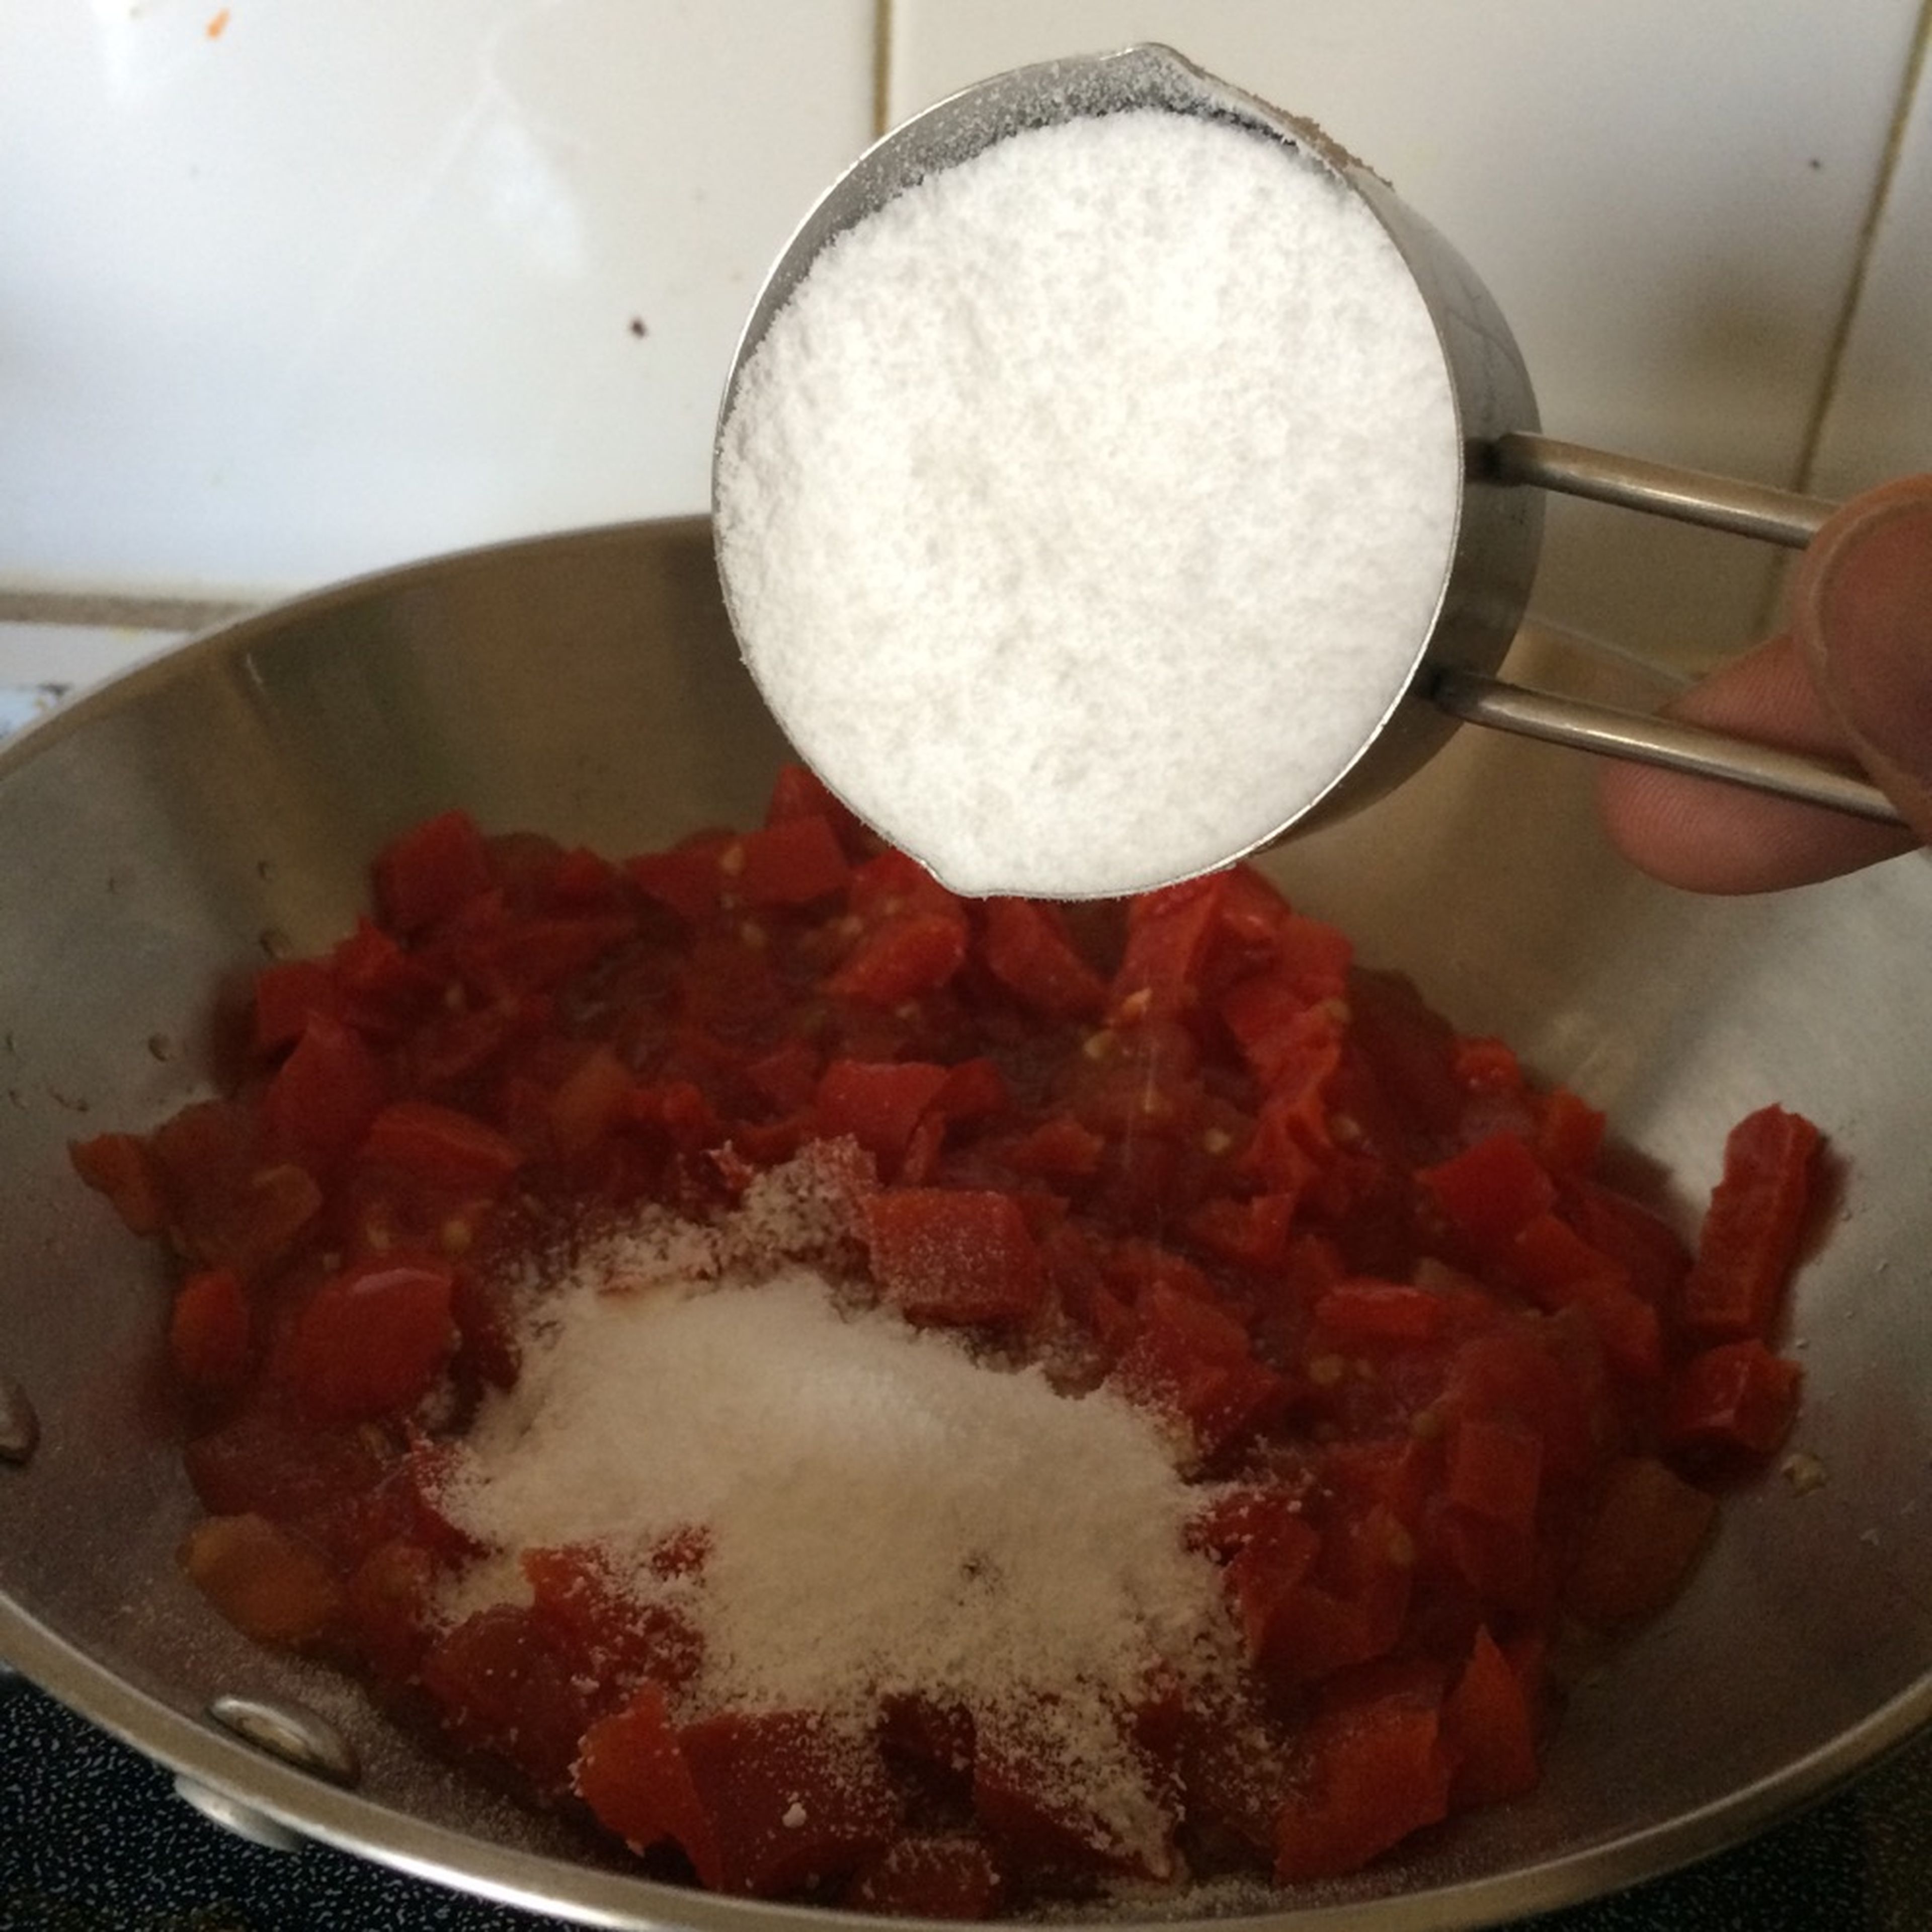 Sautée diced red pepper with stevia and cinnamon until excess water boils out.